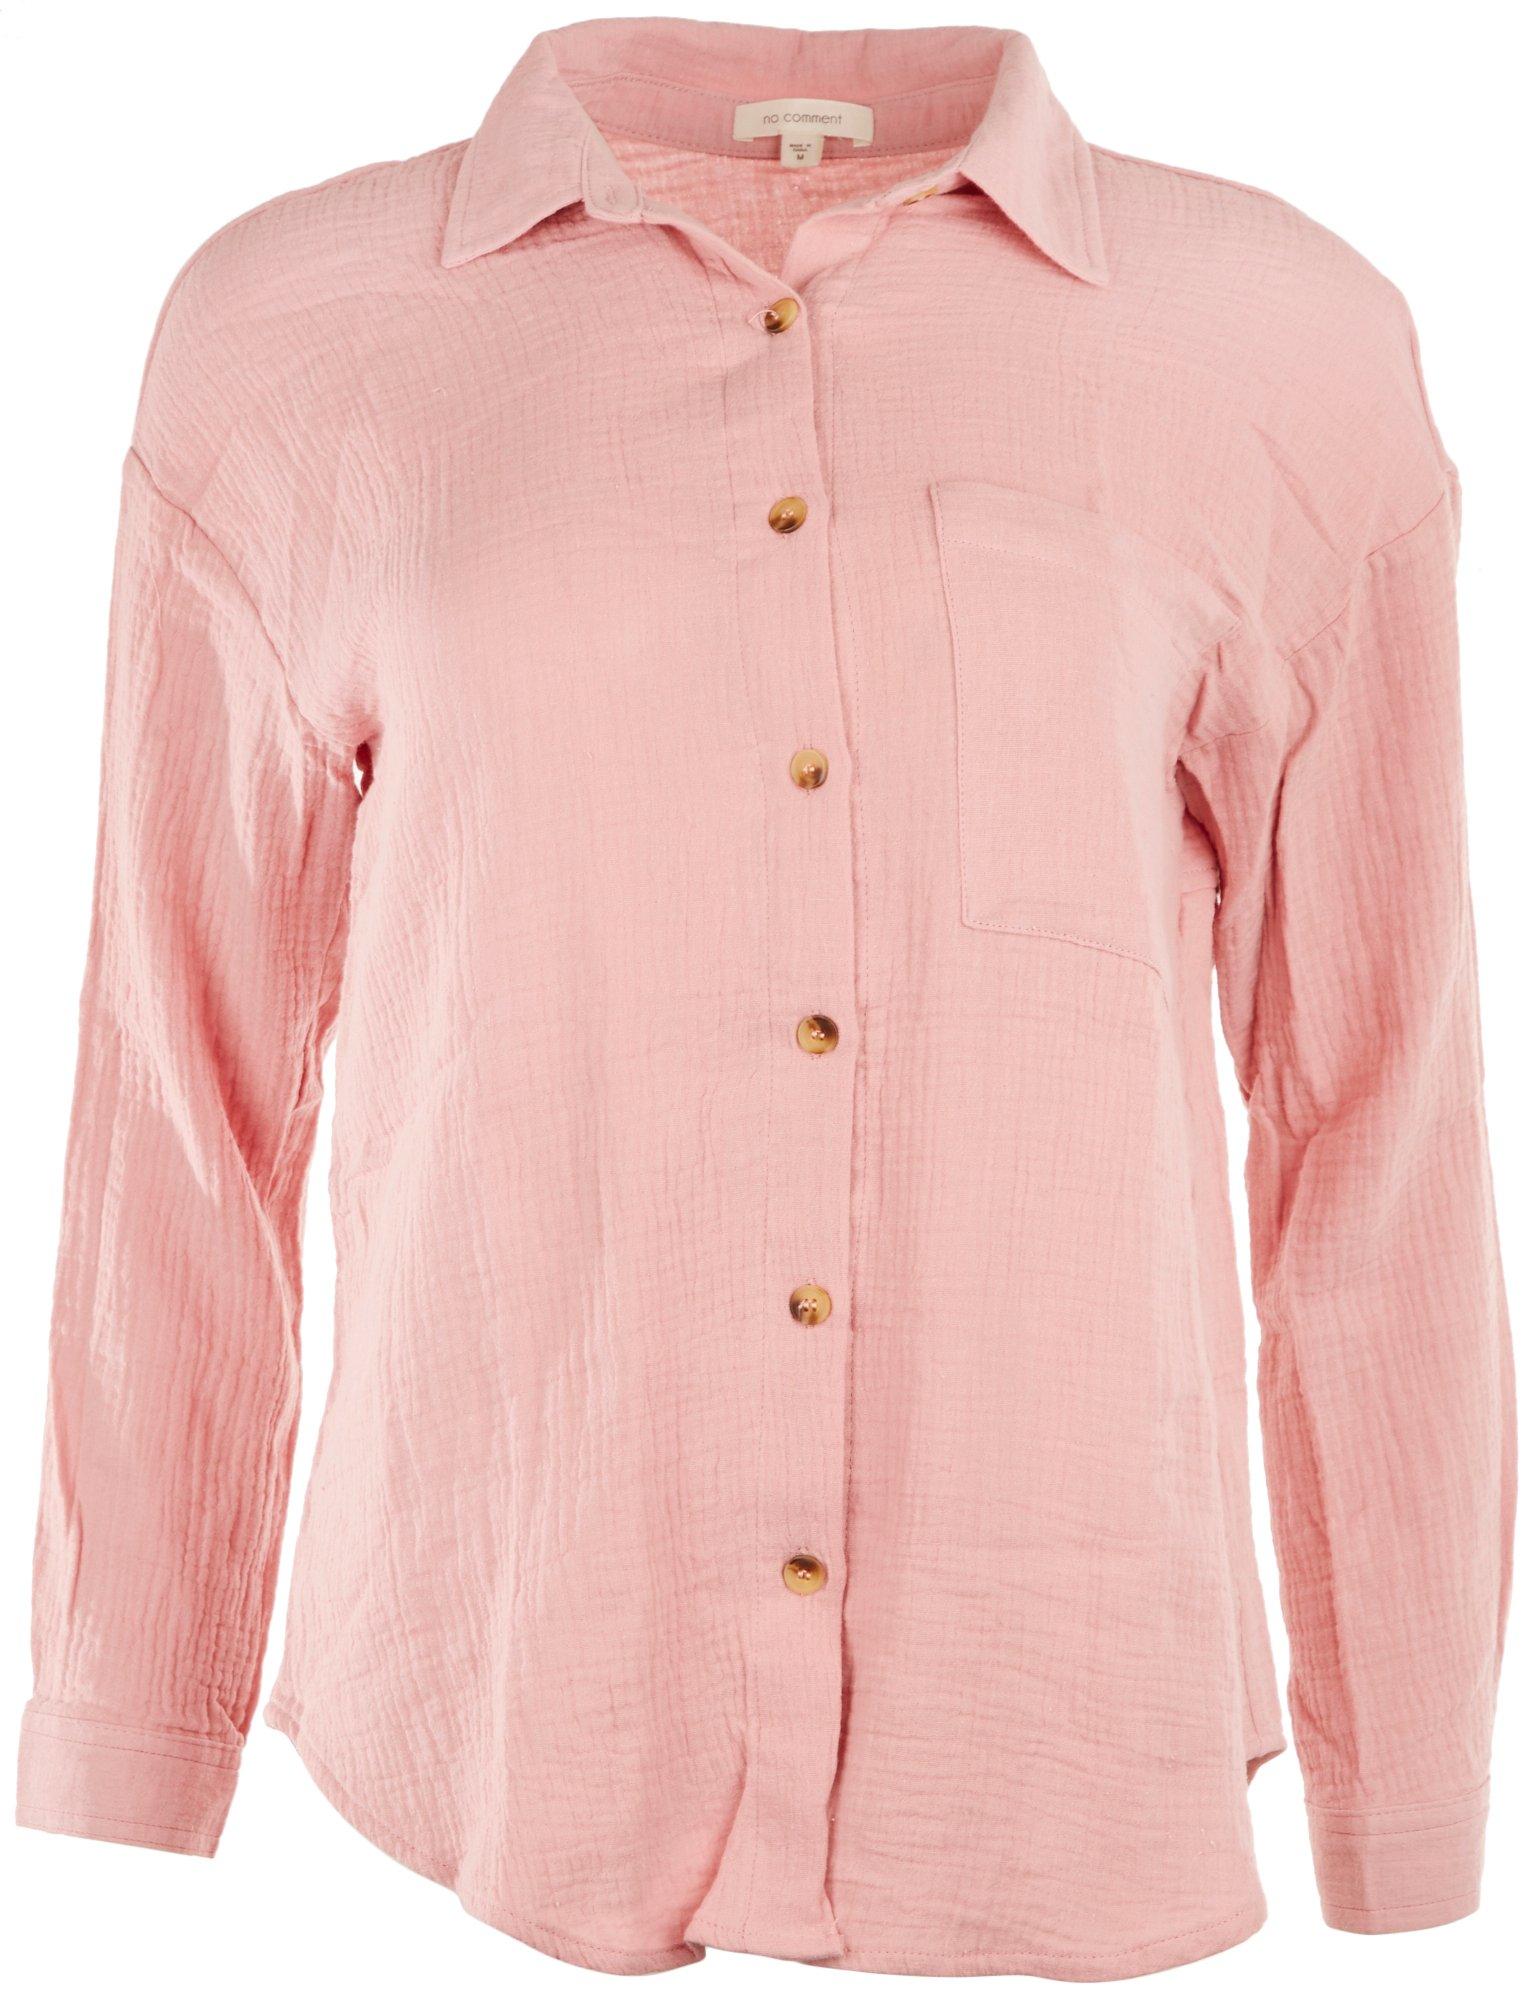 Juniors Classic Solid Button Down Long Sleeve Top